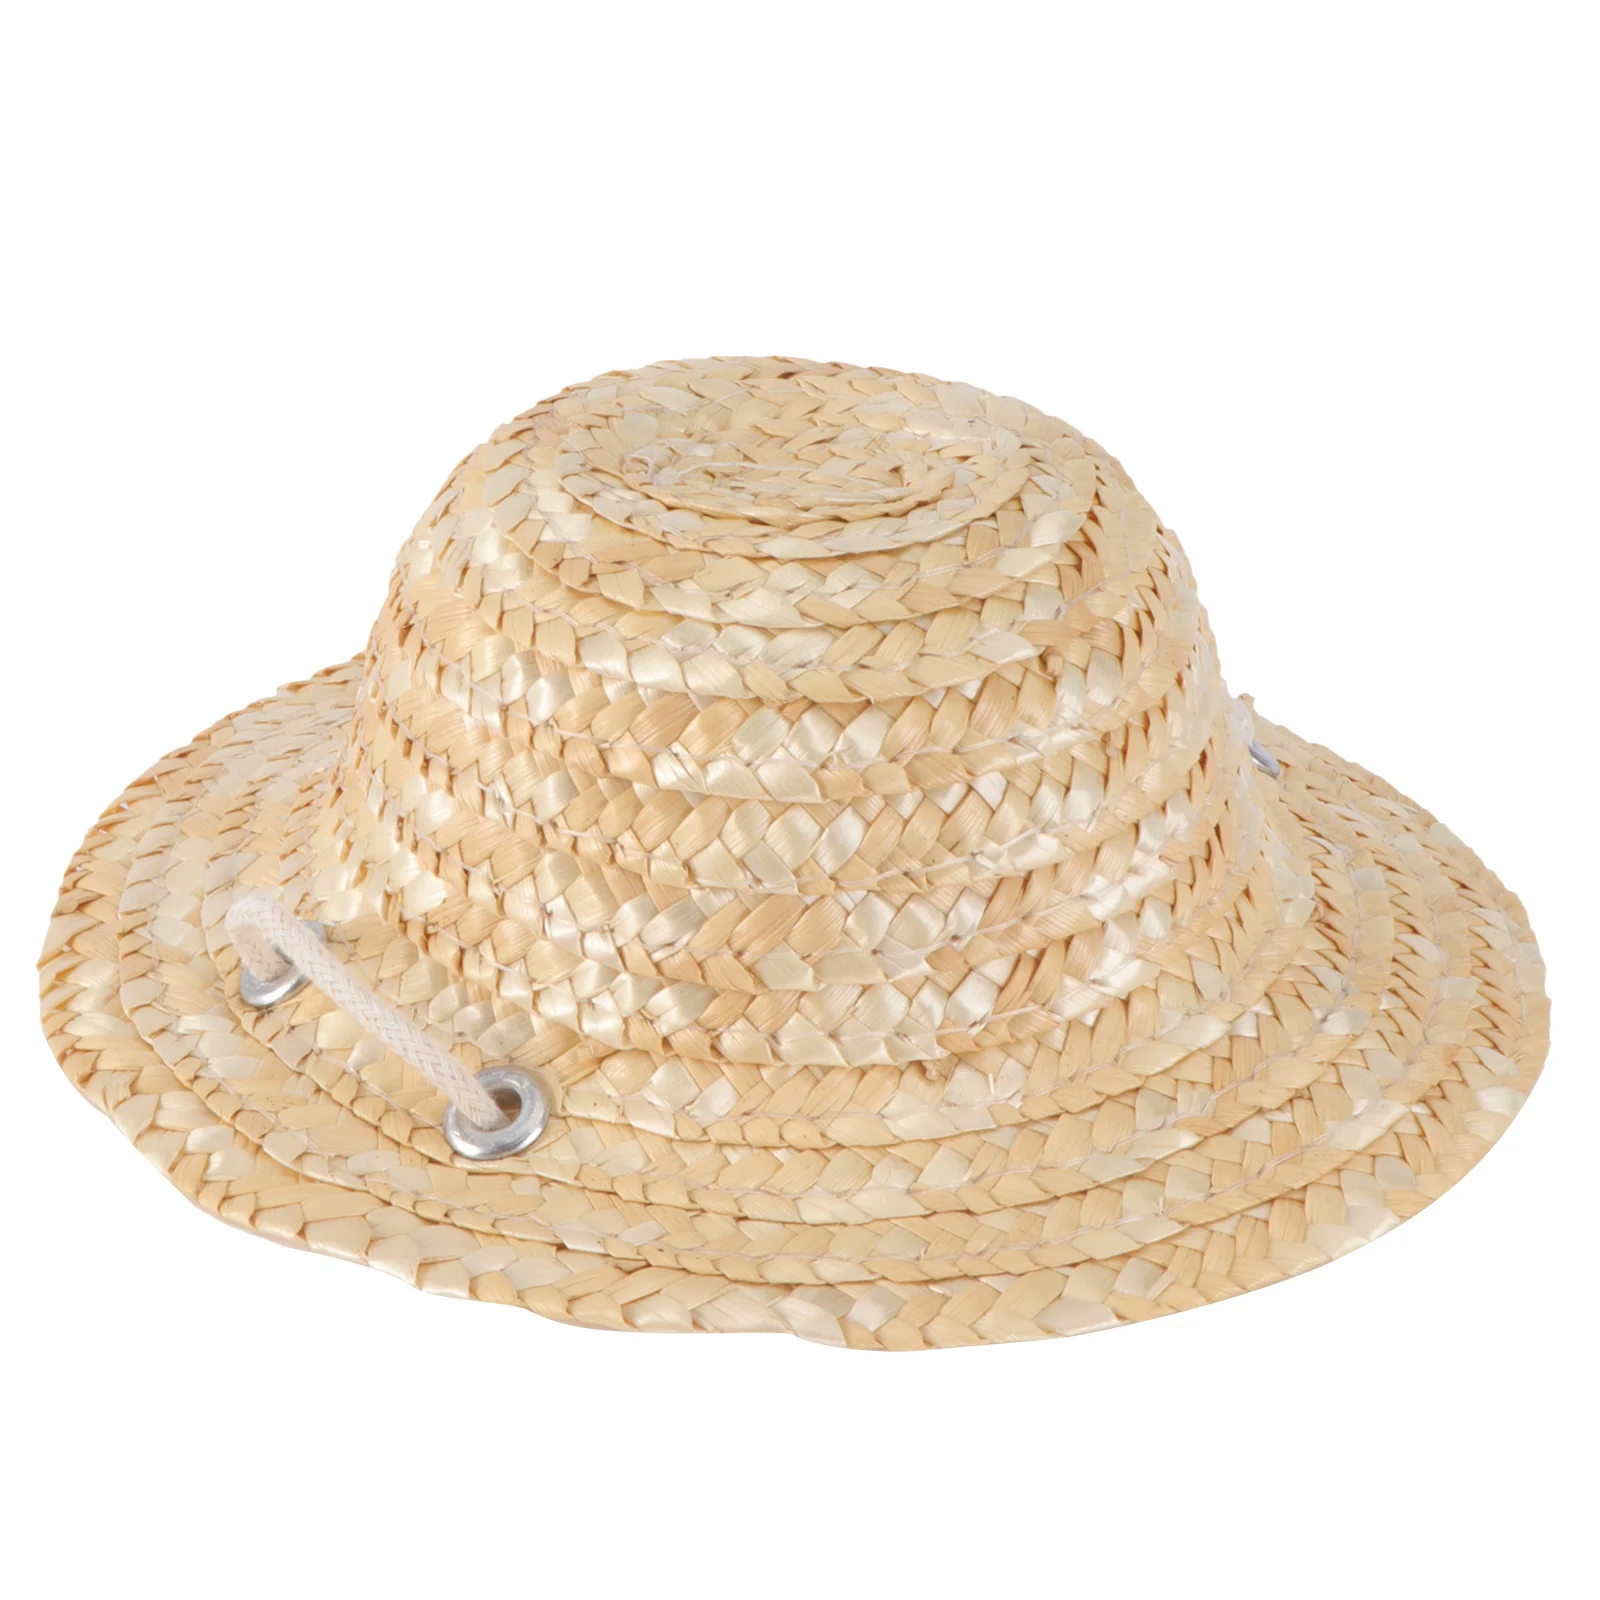 

Hat Dog Pet Straw Summer Costume Mexican Sombrero Hats Cat Puppy Woven Funny Hawaii Adjustable Birthday Head Wear Dogs Mini Cats